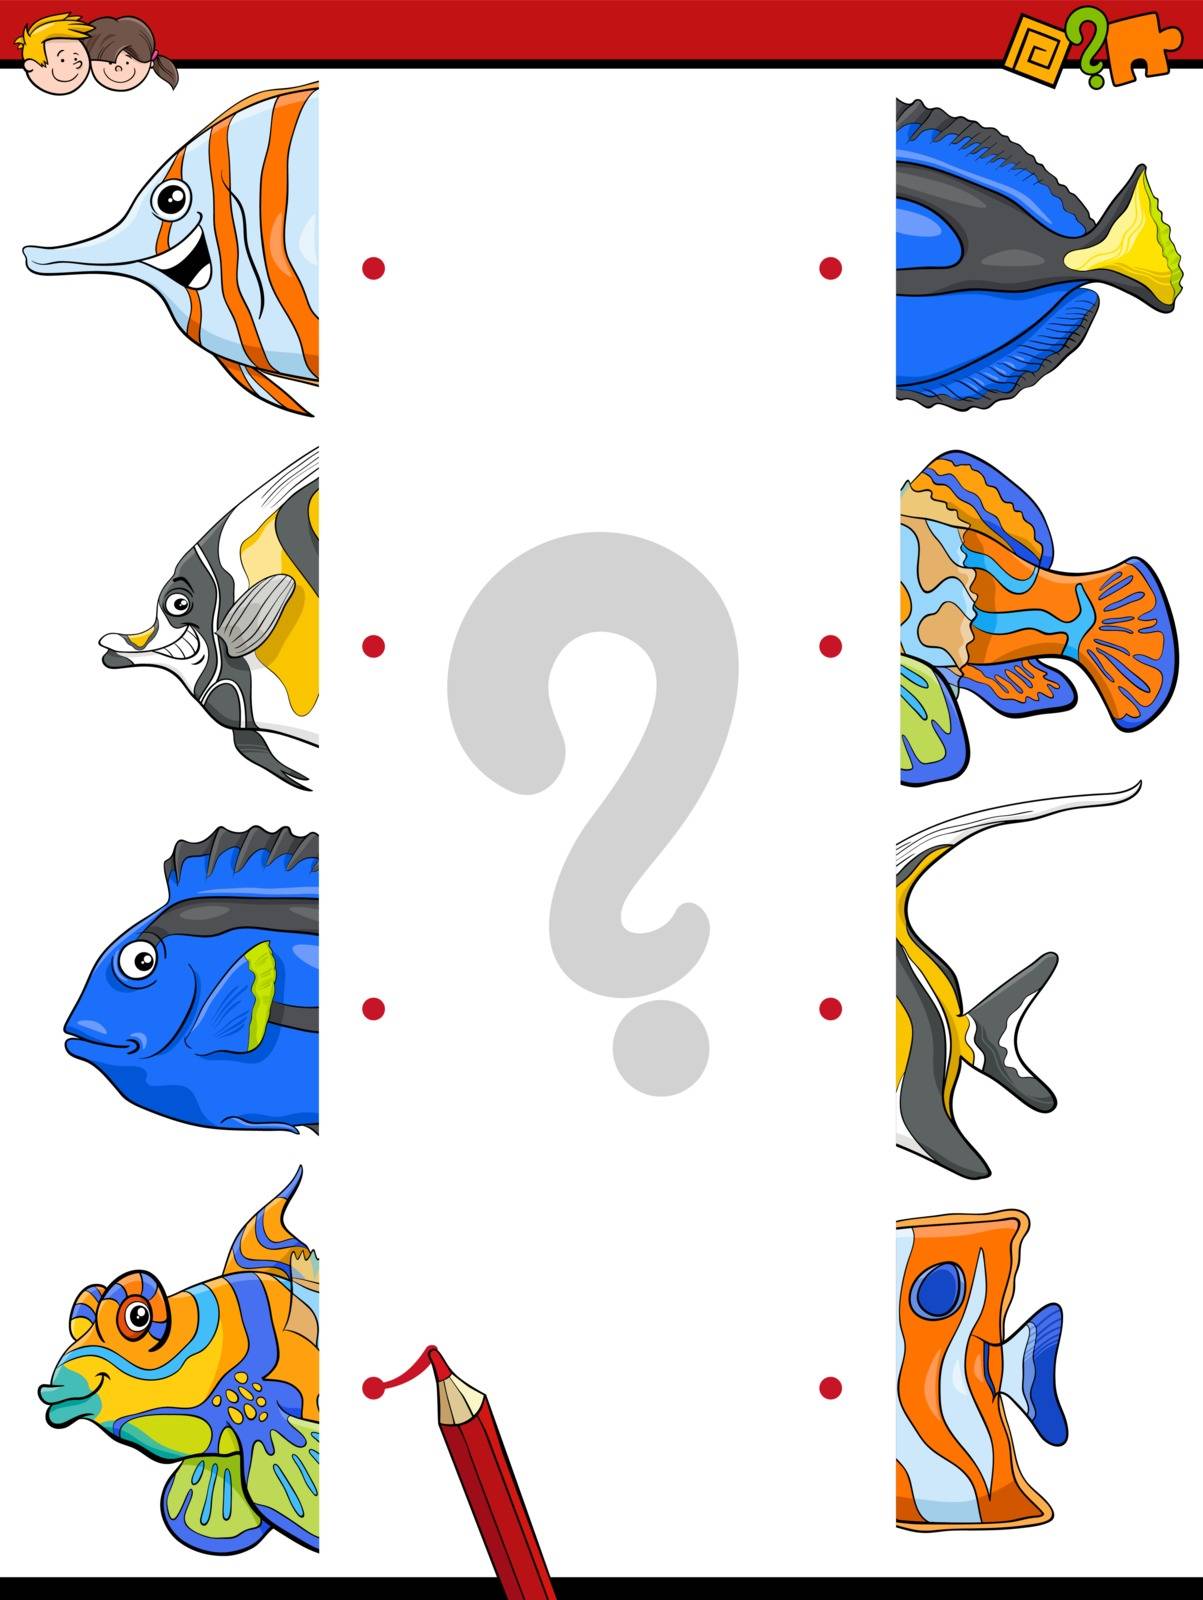 Cartoon Illustration of Educational Game of Matching Halves with Fish Animal Characters